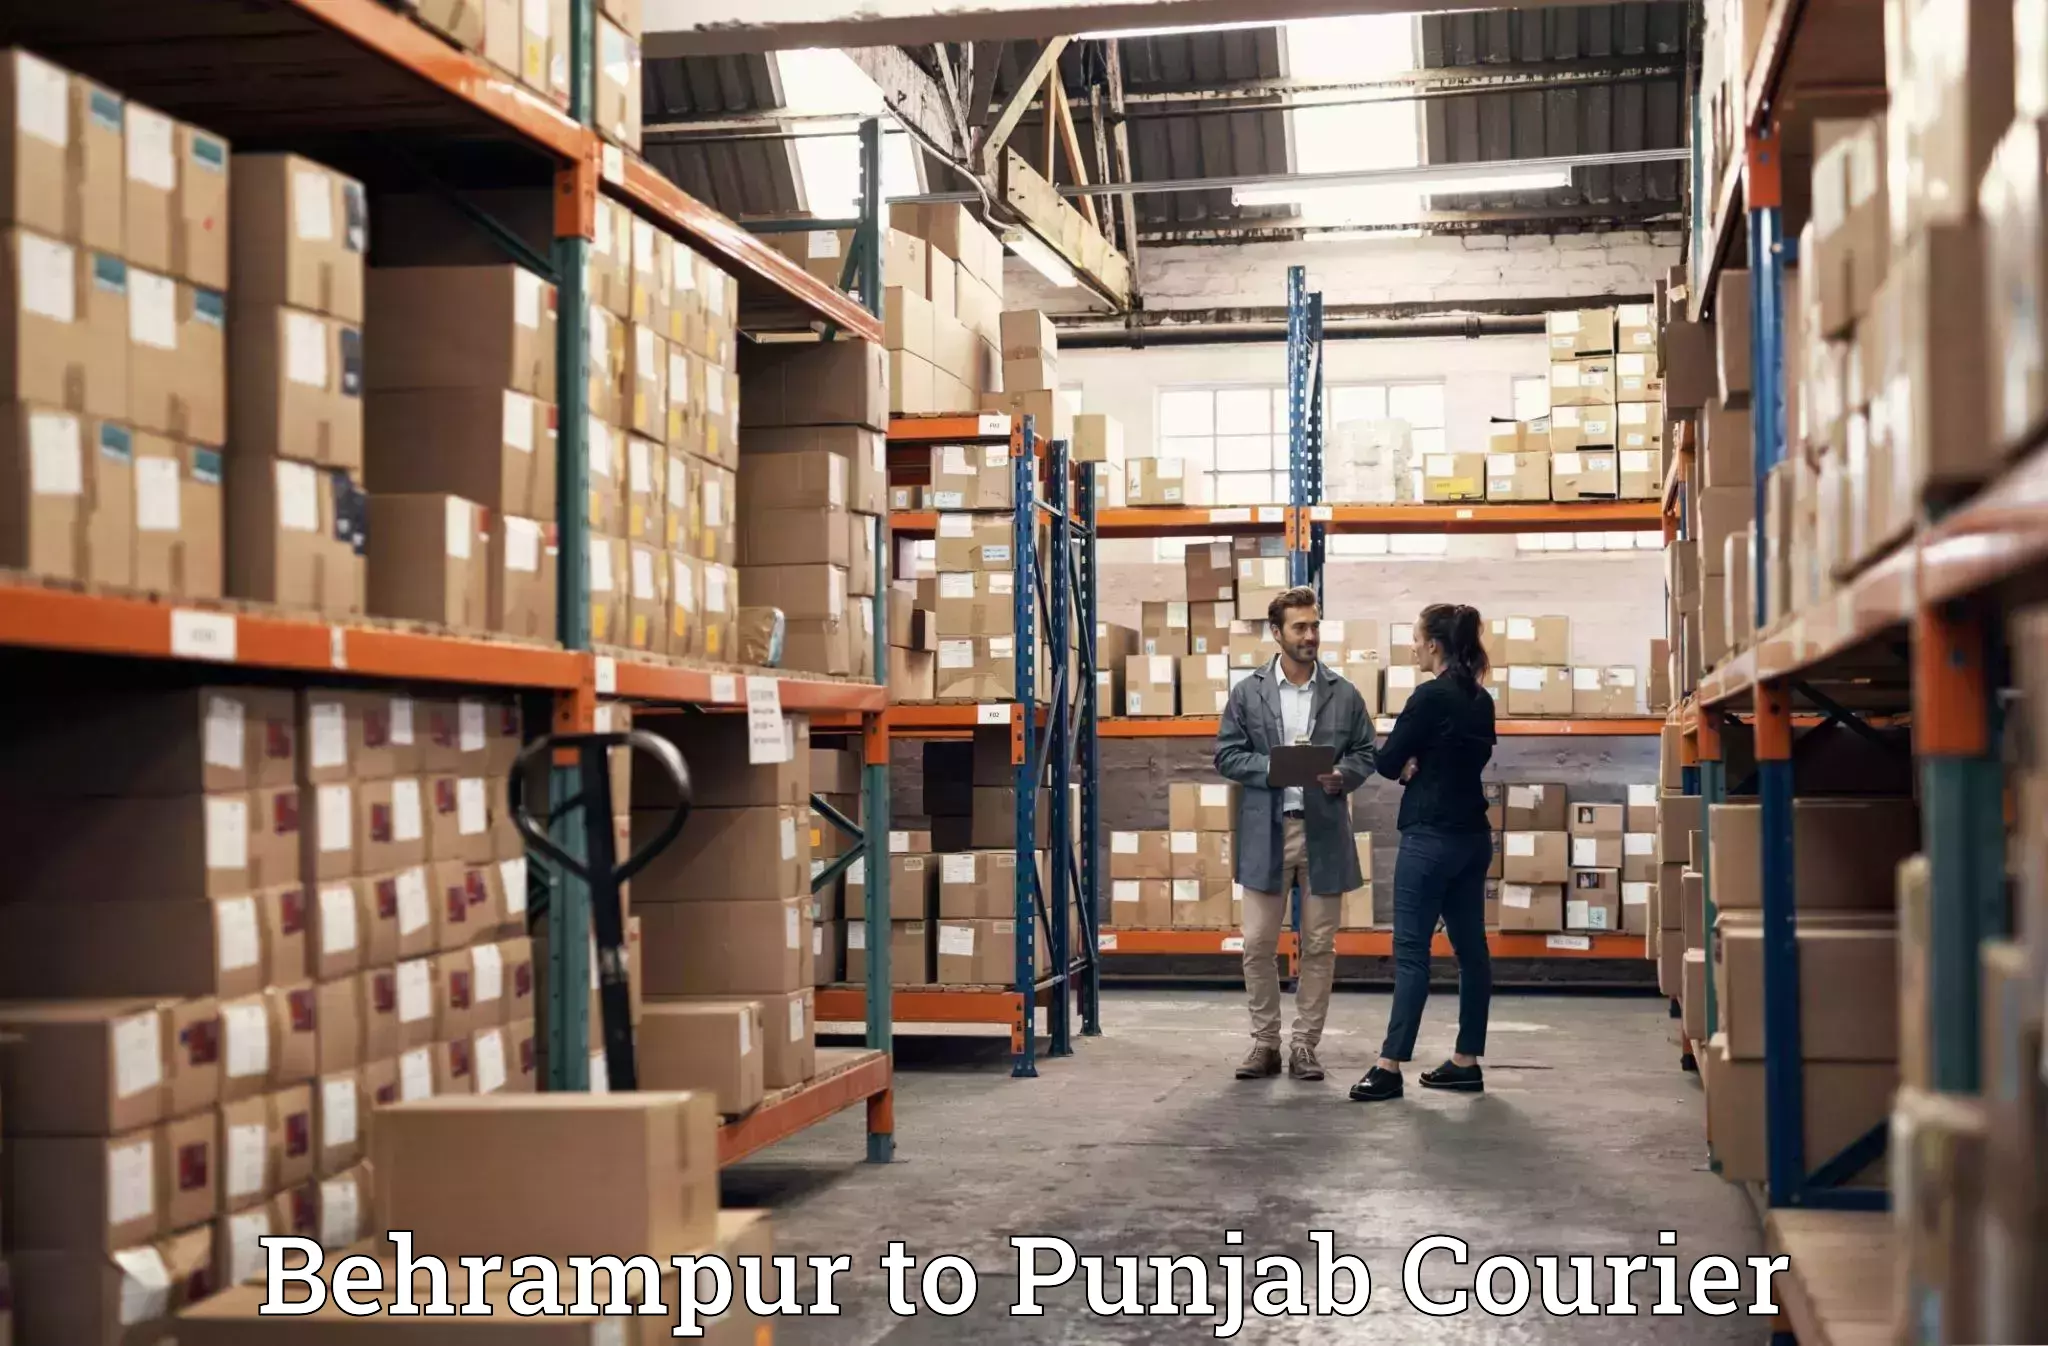 Professional moving company Behrampur to Dharamkot